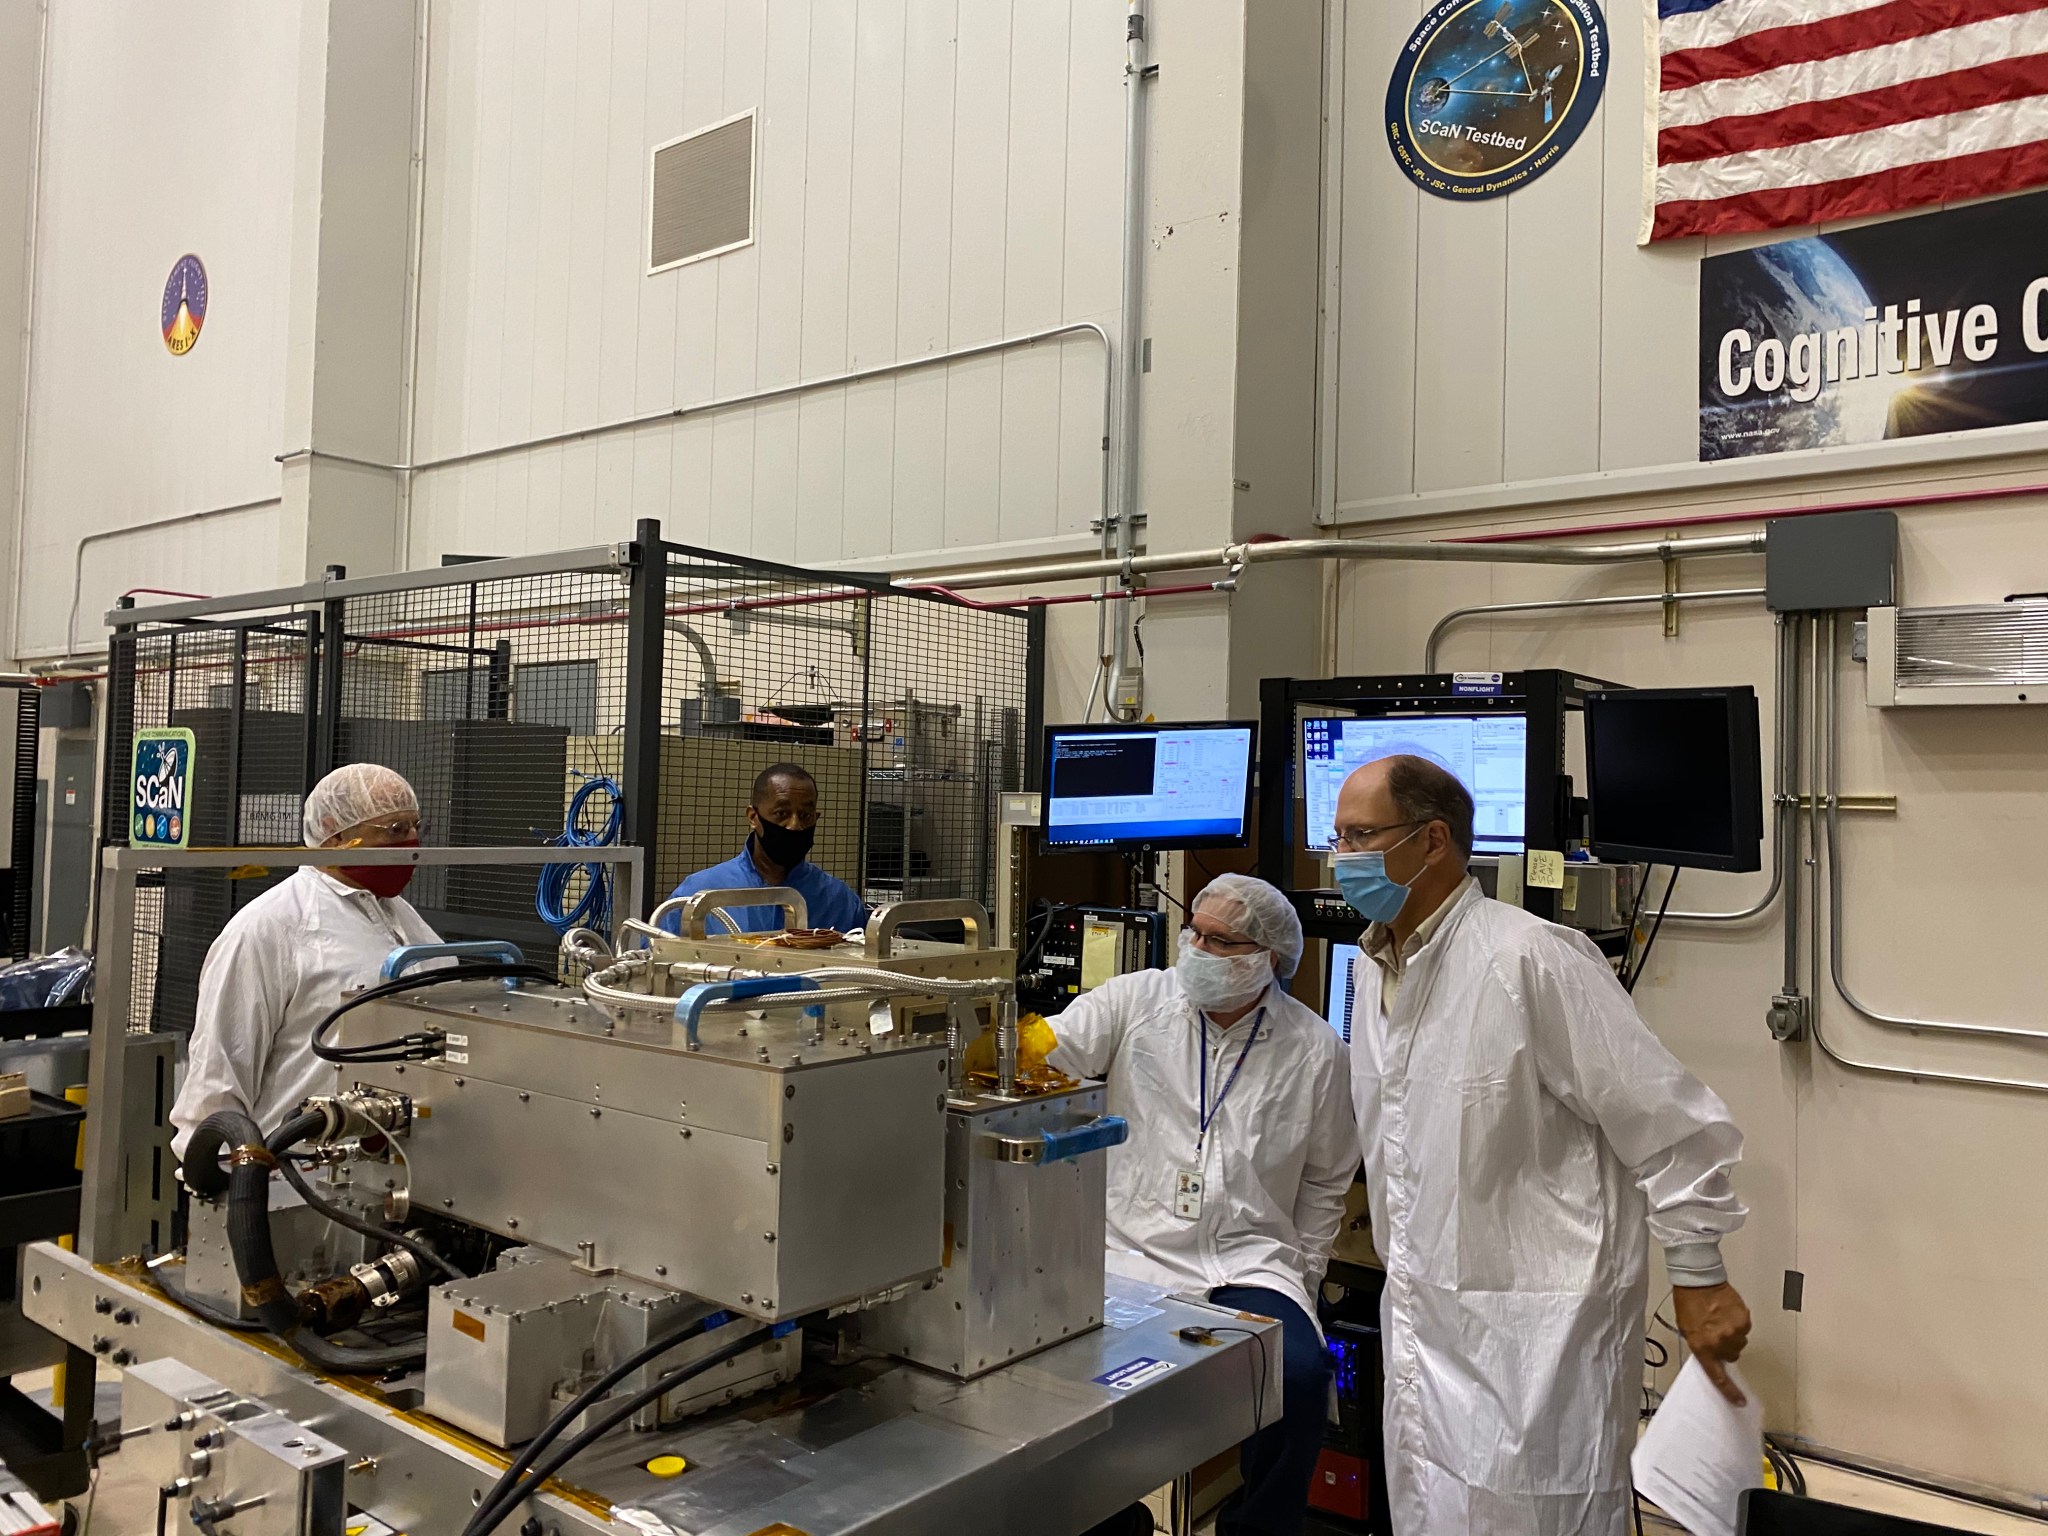 Researchers in a lab surround space hardware.